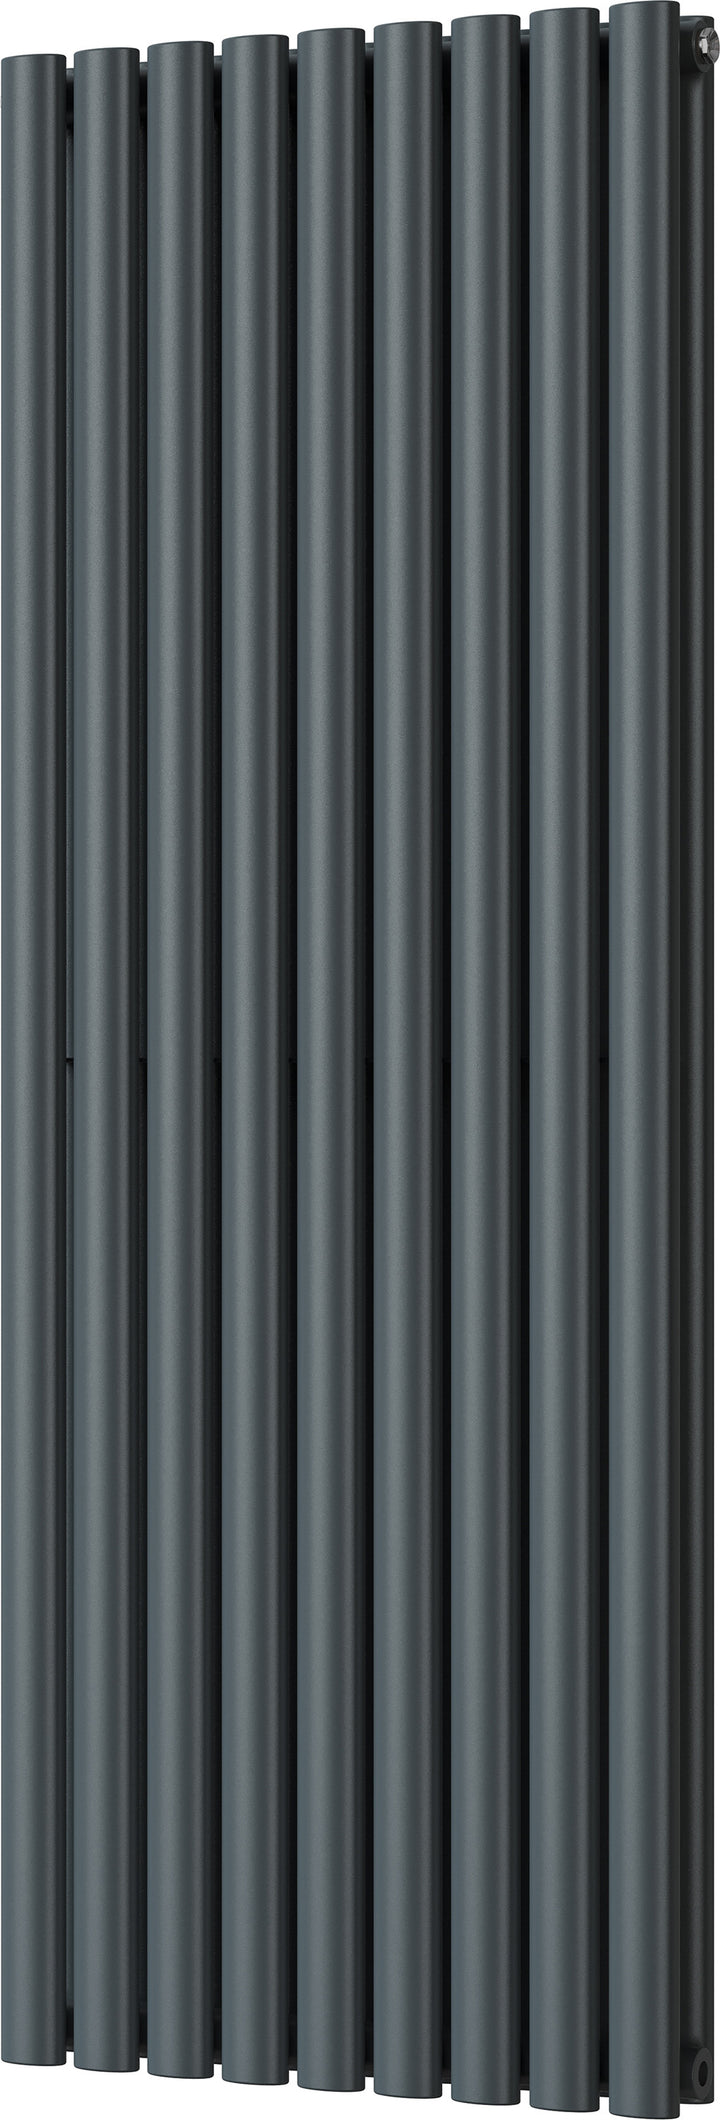 Omeara - Anthracite Vertical Radiator H1400mm x W522mm Double Panel